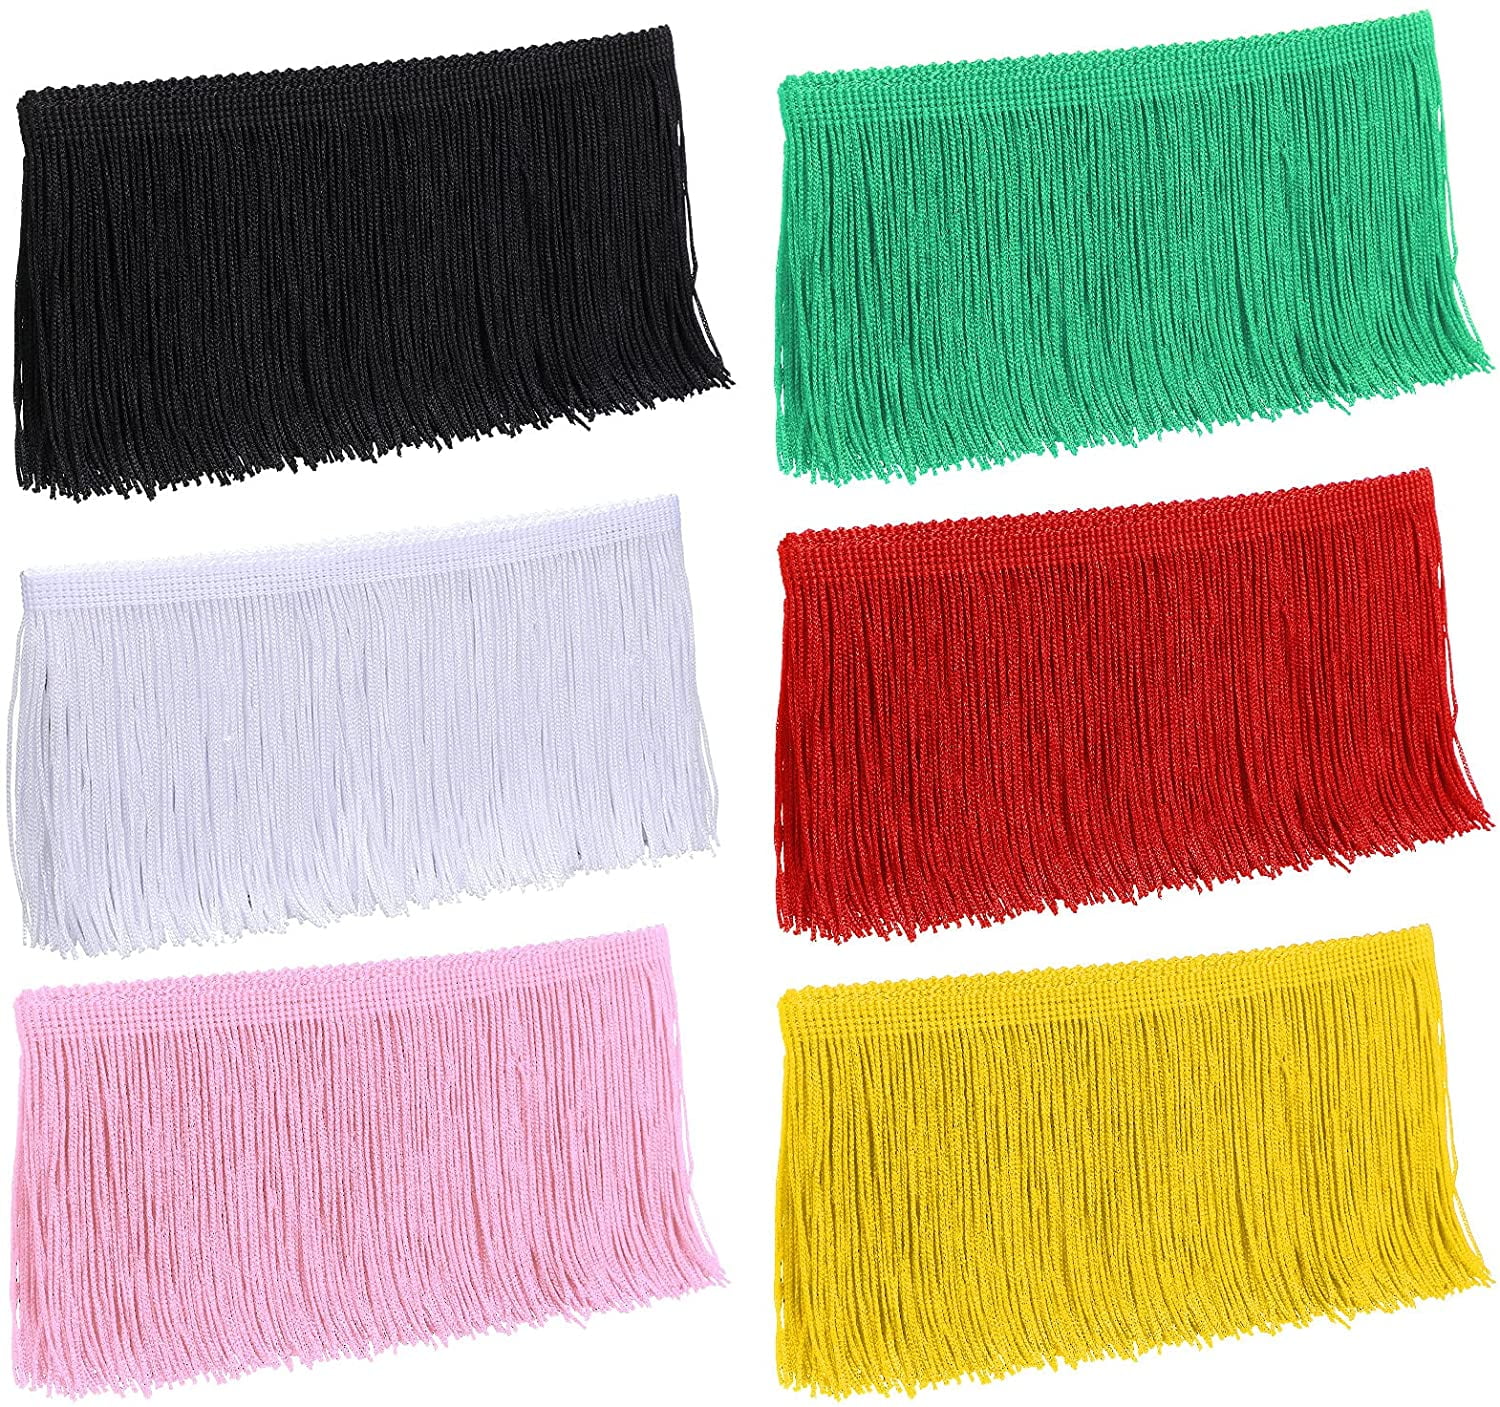 Heartwish268 Fringe Trim Lace Polyerter Fibre Tassel 6inch Wide 10 Yards Long for Clothes Accessories Latin Wedding Dress DIY Lamp Shade Decoration Black White Red Brown 